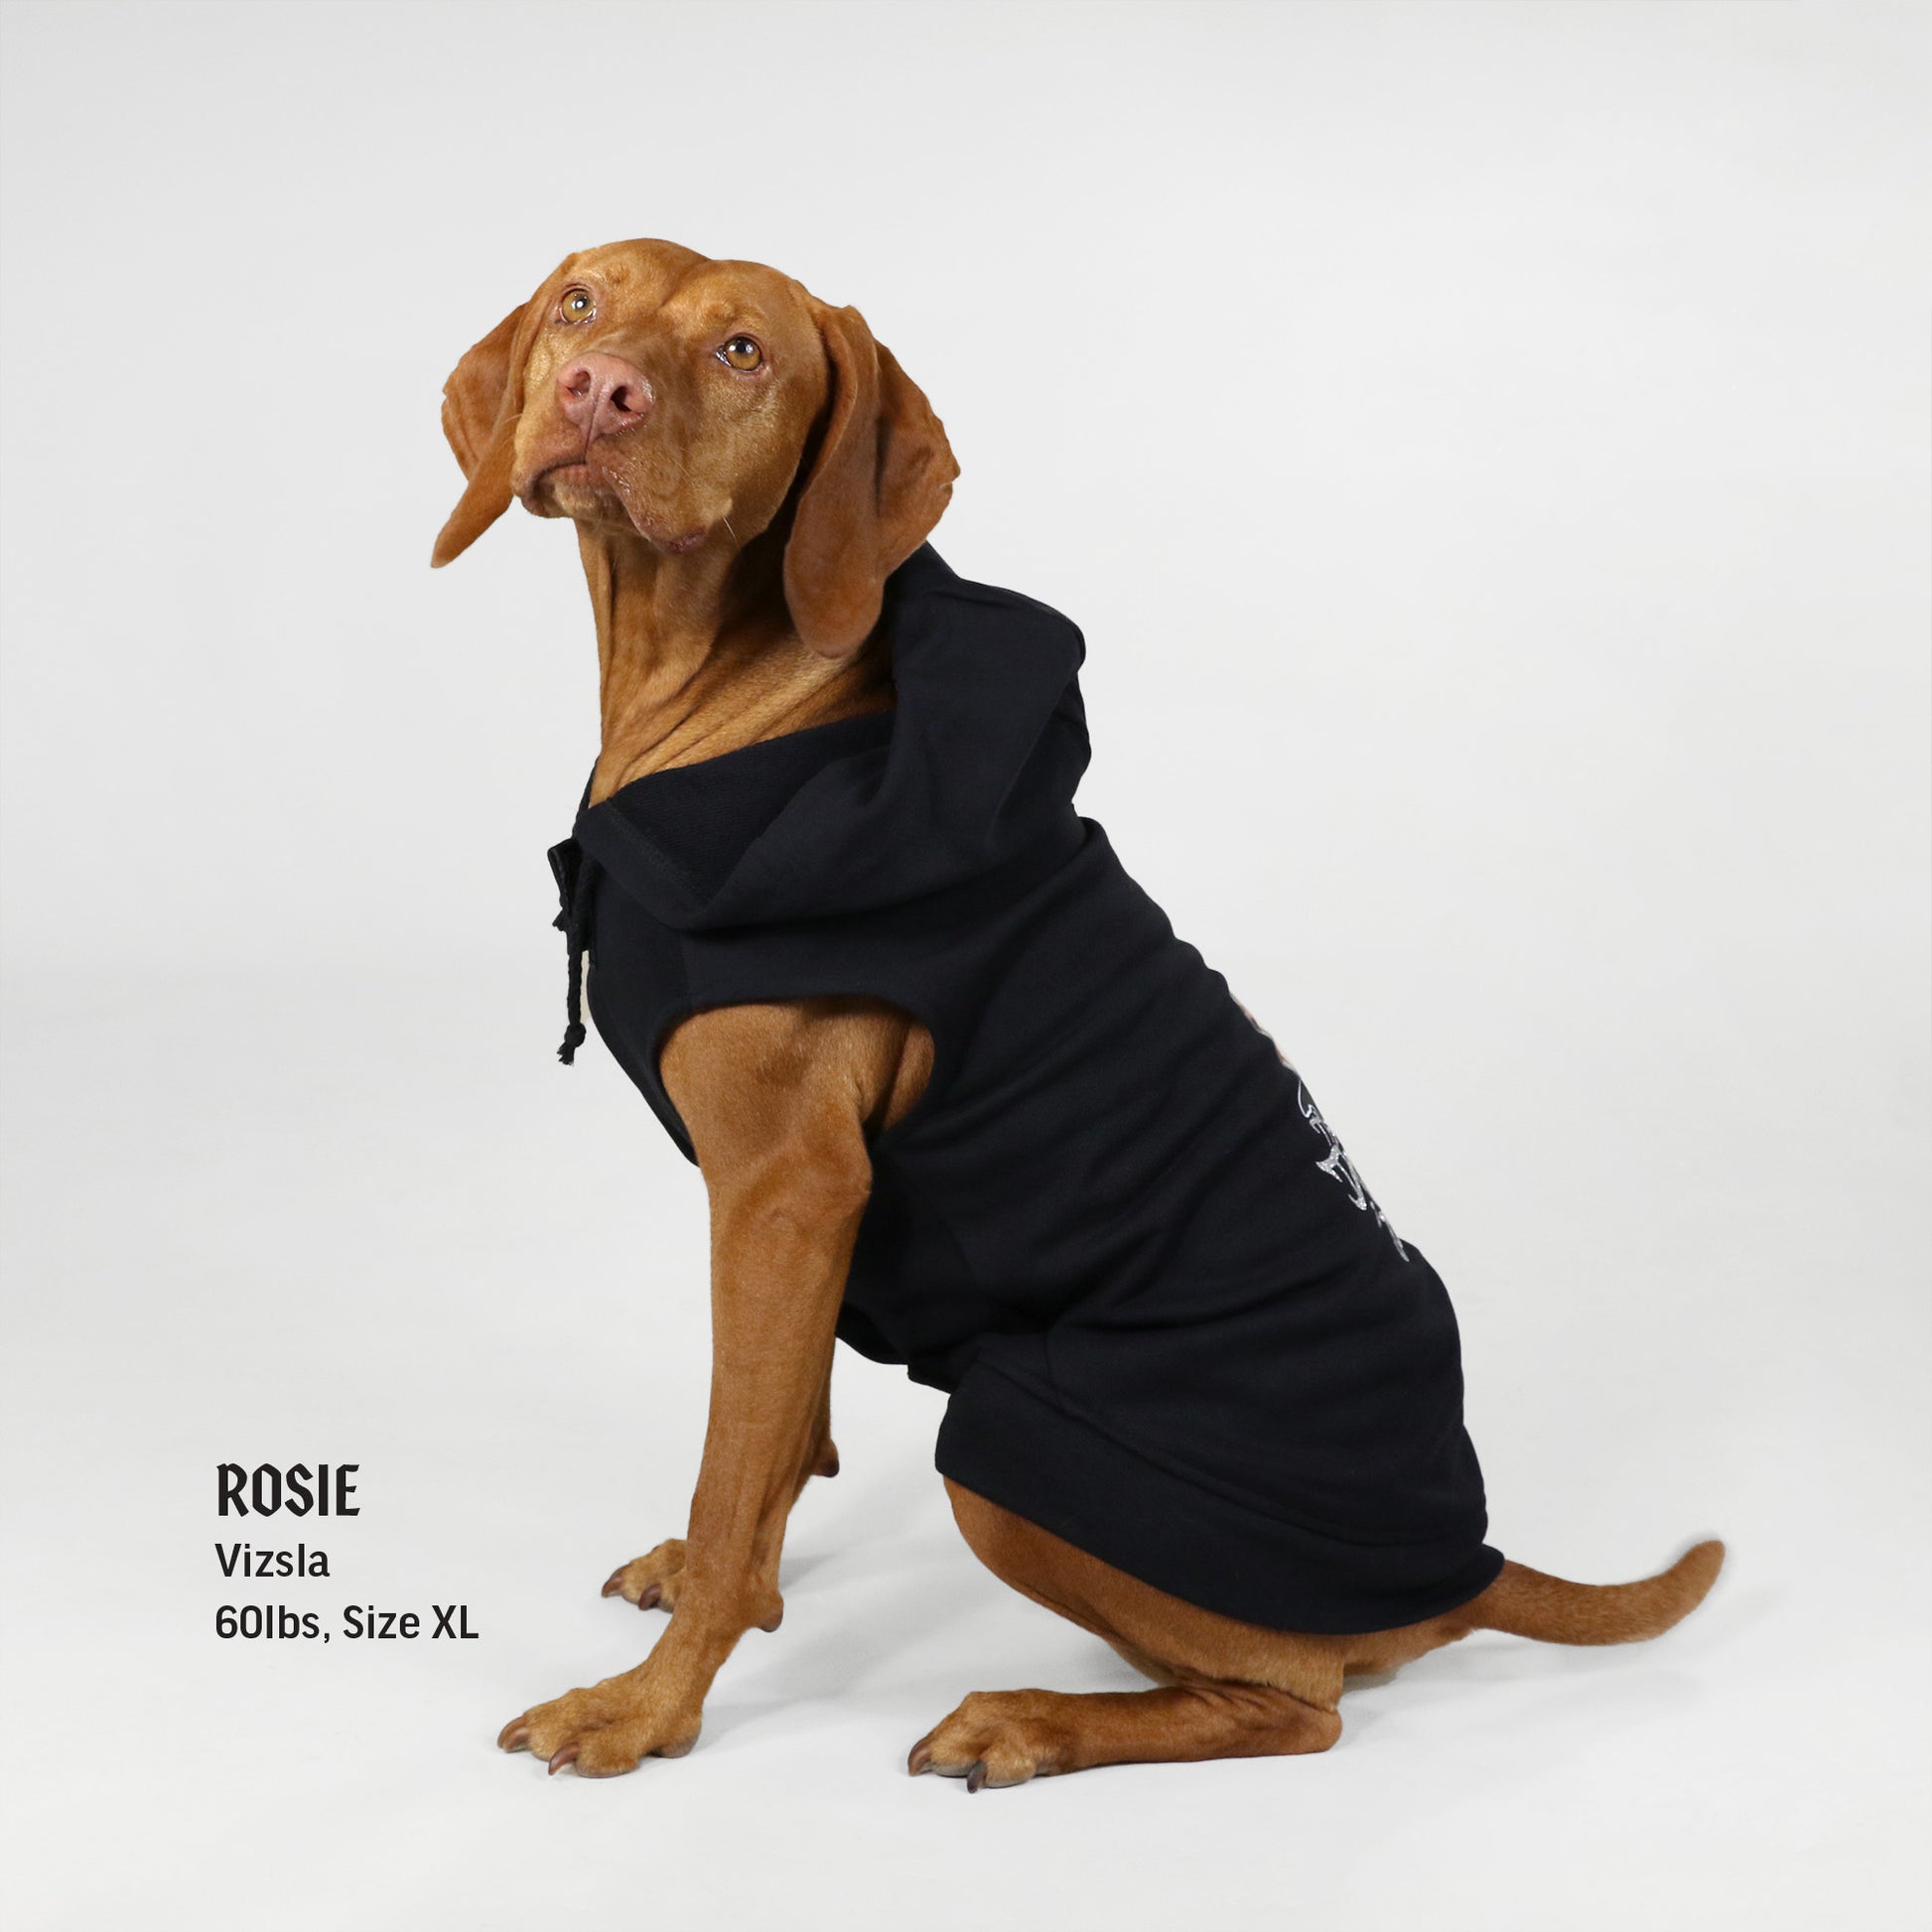 Rosie the Vizsla wearing the Throw A Dogg A Bone Deluxe Pet Hoodie in size Extra Large.